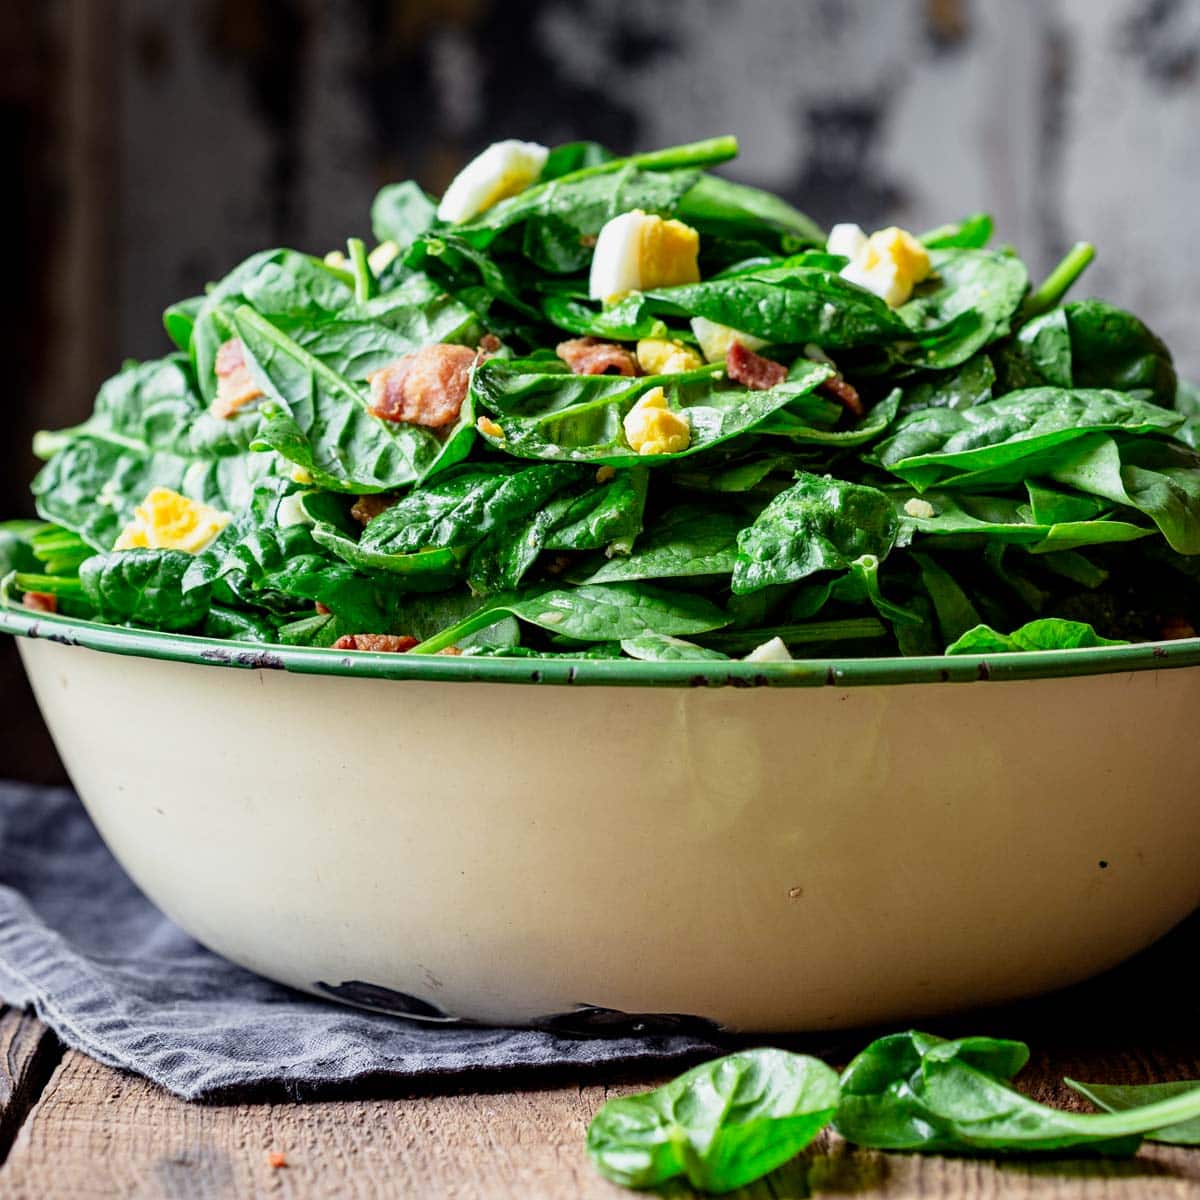 A bowl of salad with Spinach and Bacon